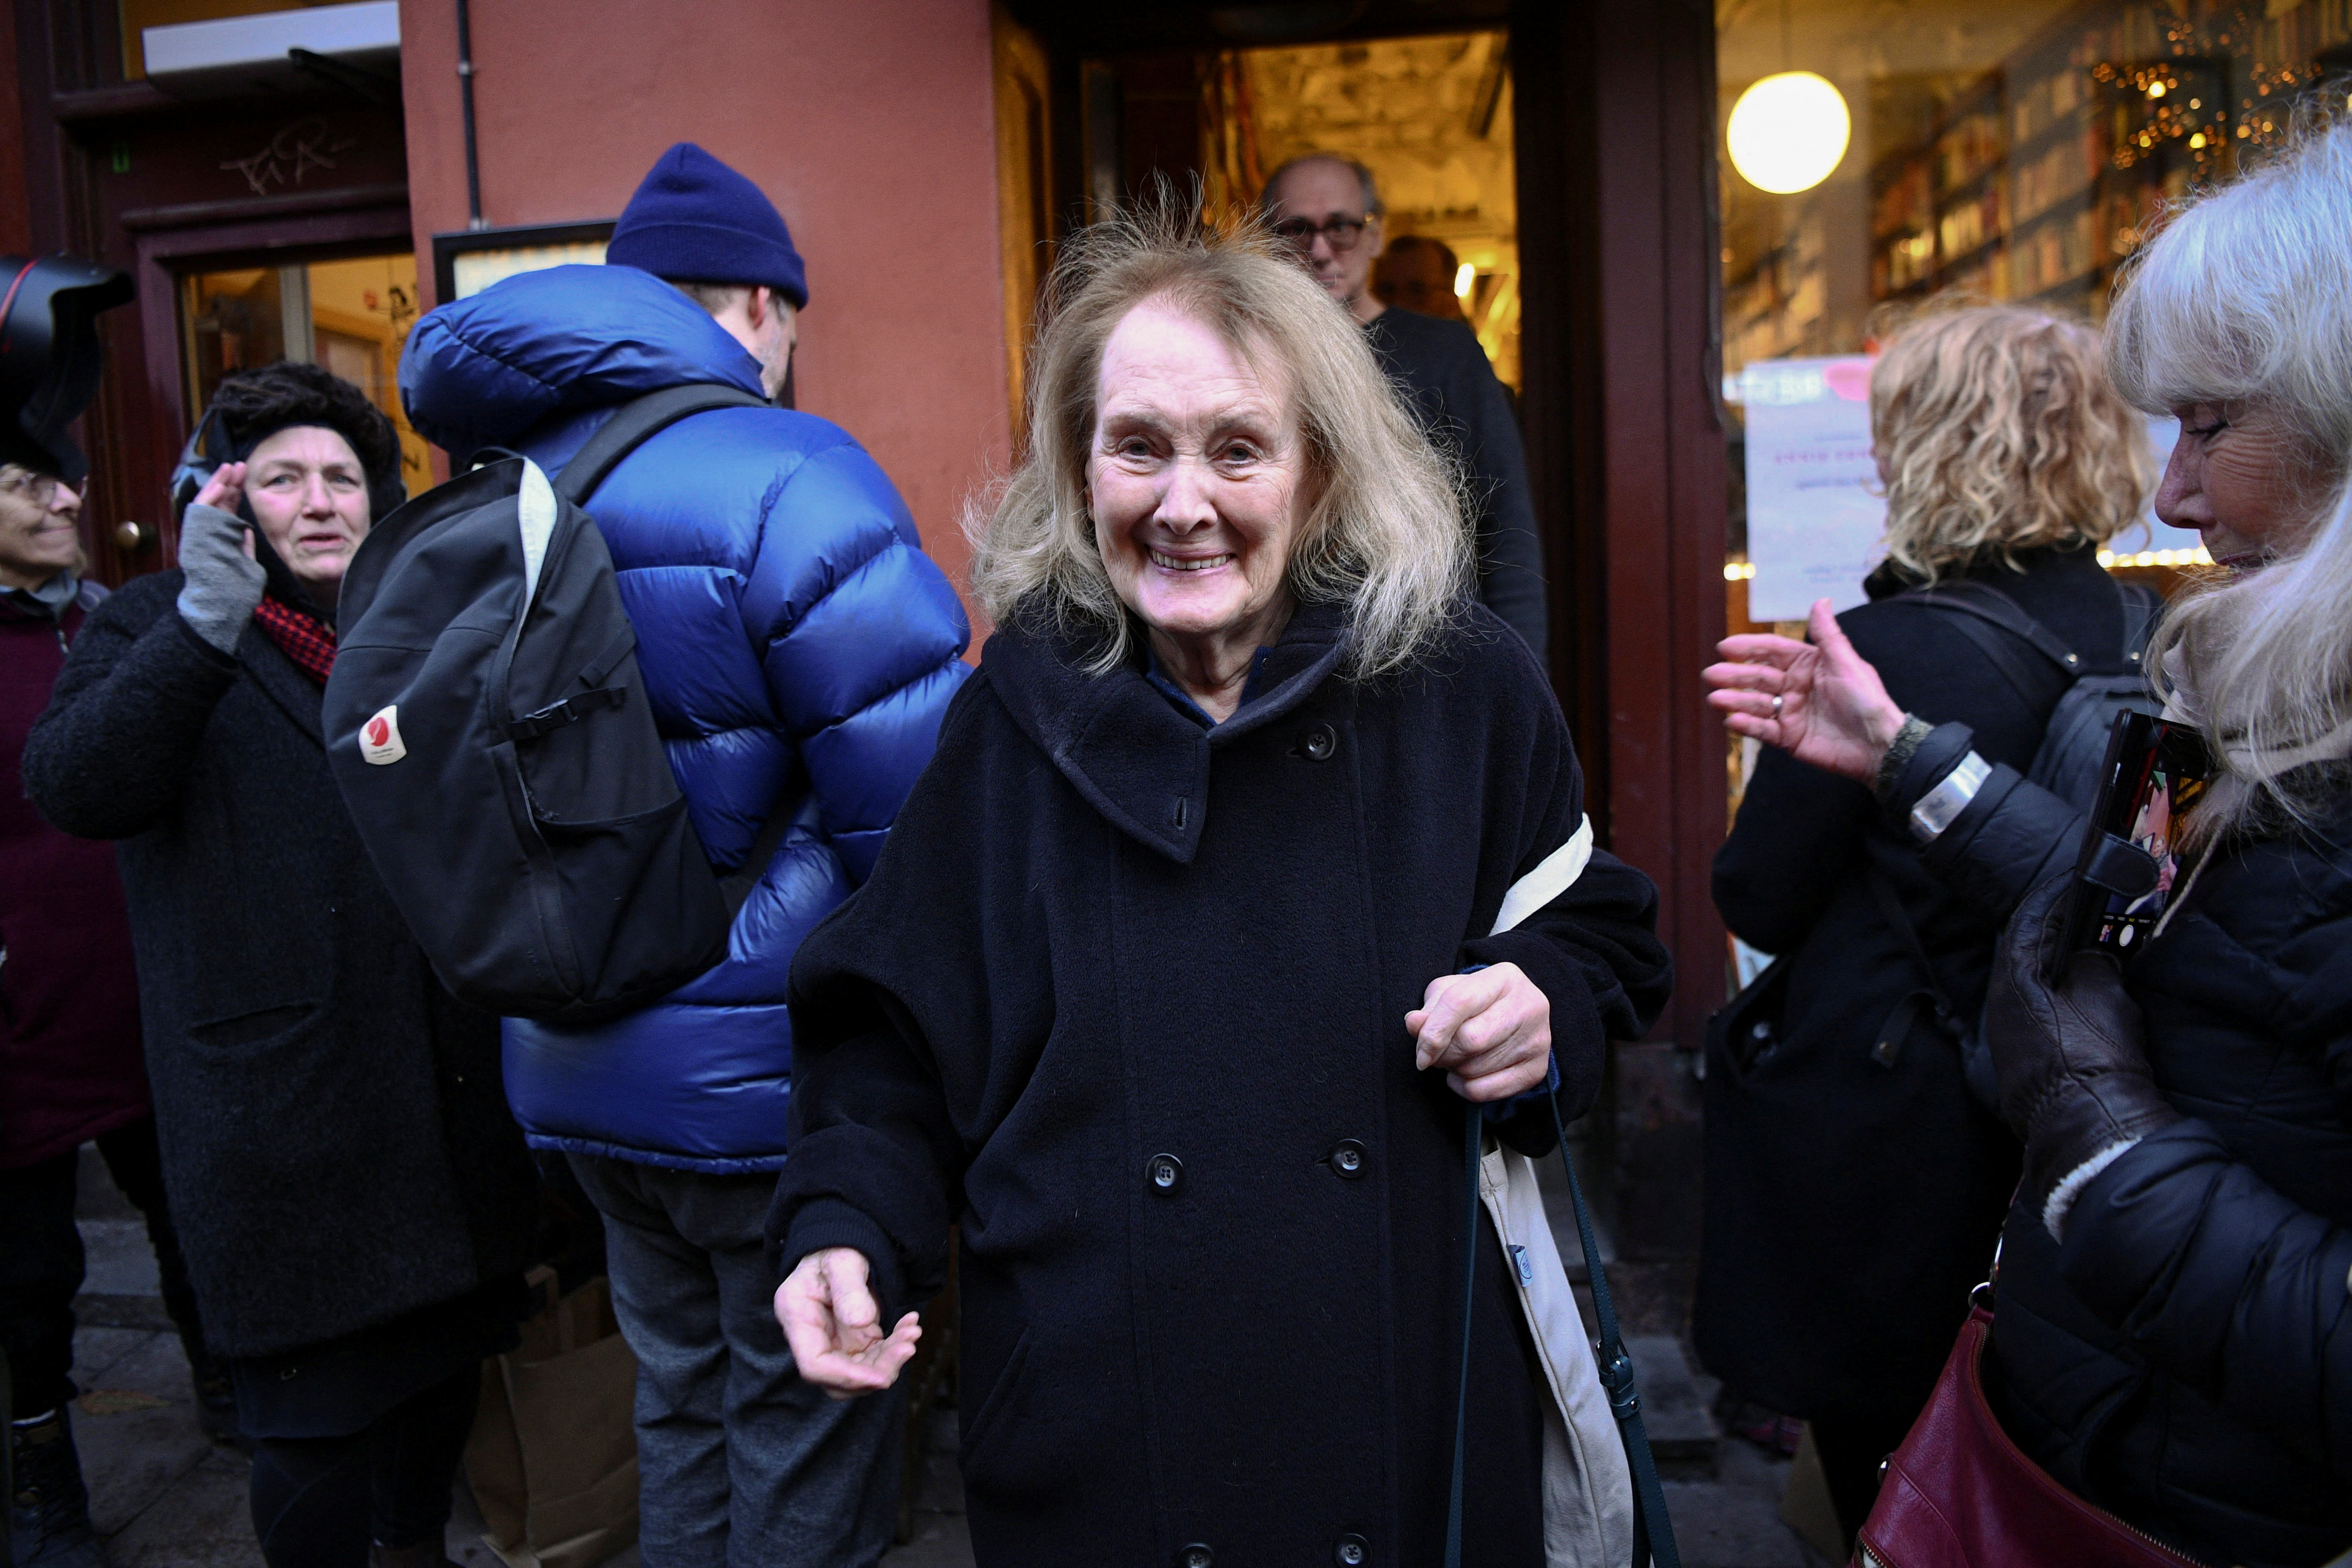 Annie Ernaux leaves a bookstore in Stockholm, after signing her books (Photo: TT News Agency/Tim Aro via REUTERS)